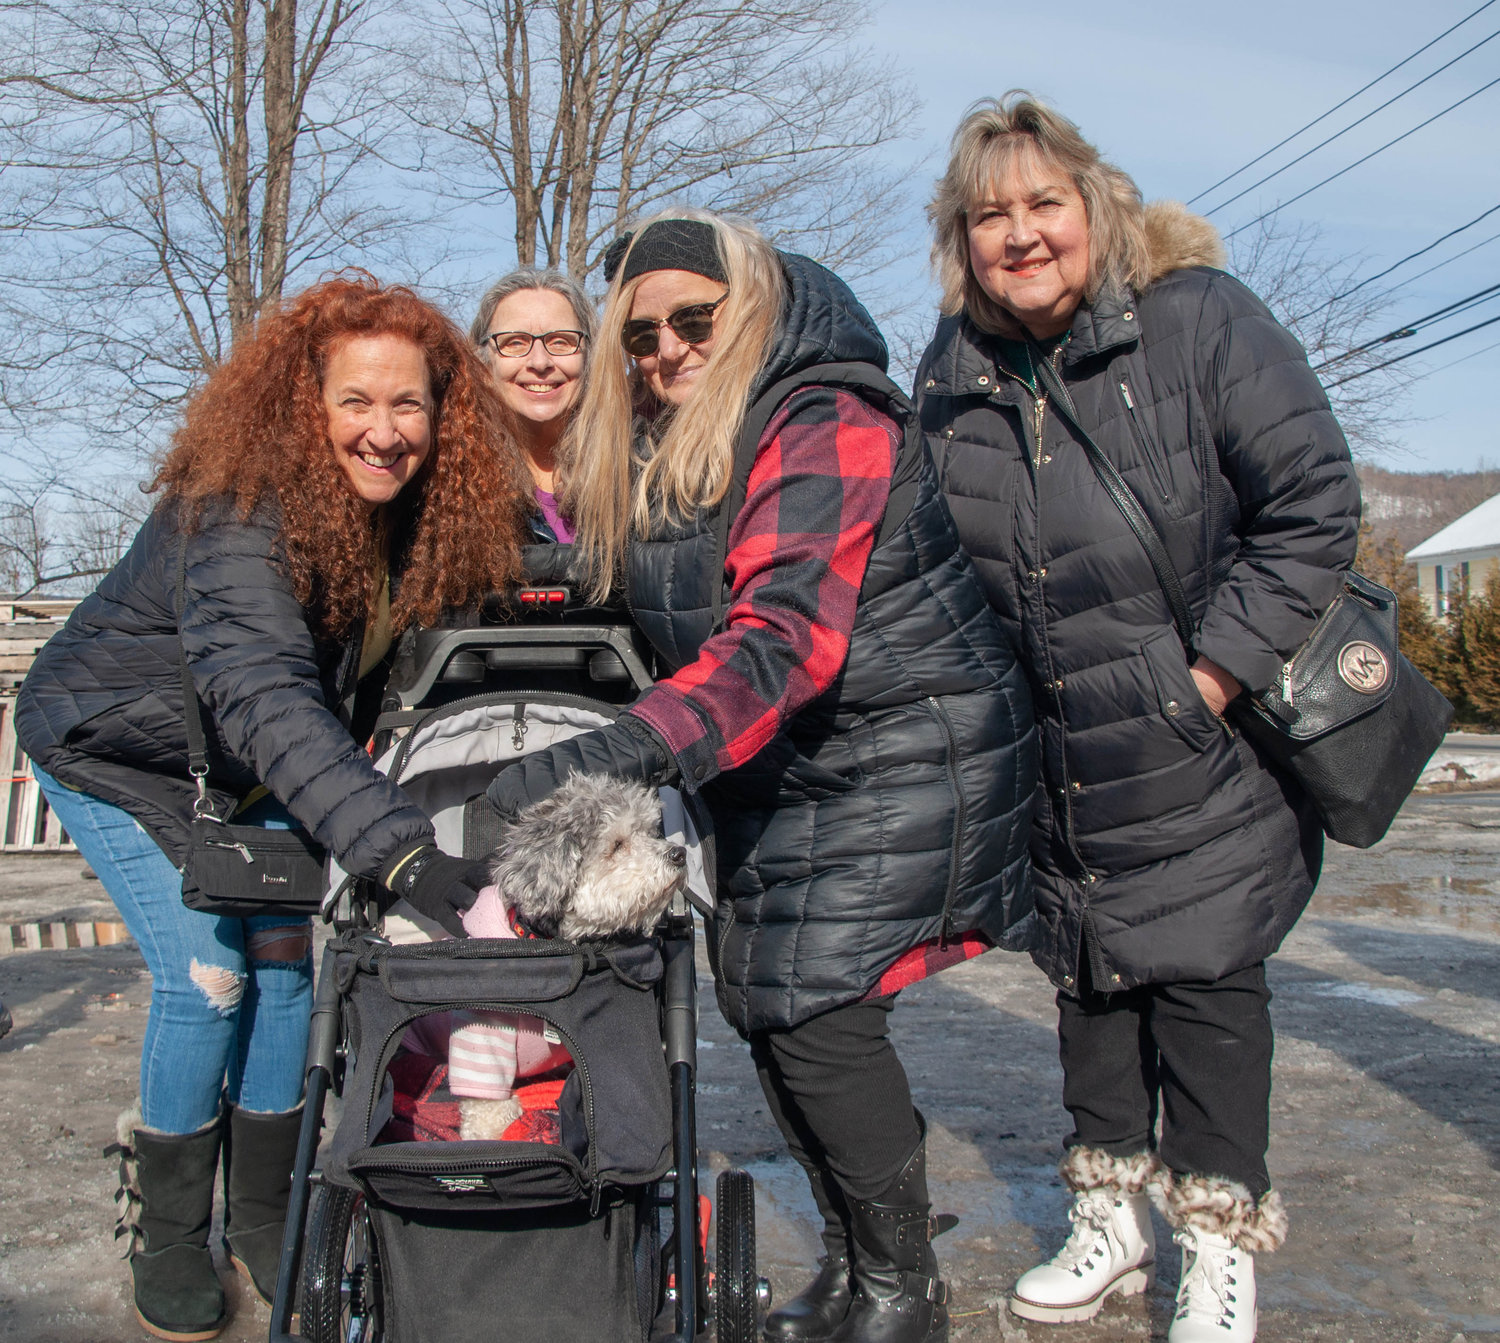 I ran into Lori Rae, left, Jenny, another Laurie and Nadia at Roscoe Beer's WinterFest again last Saturday, while Dharma scouted for squirrels.